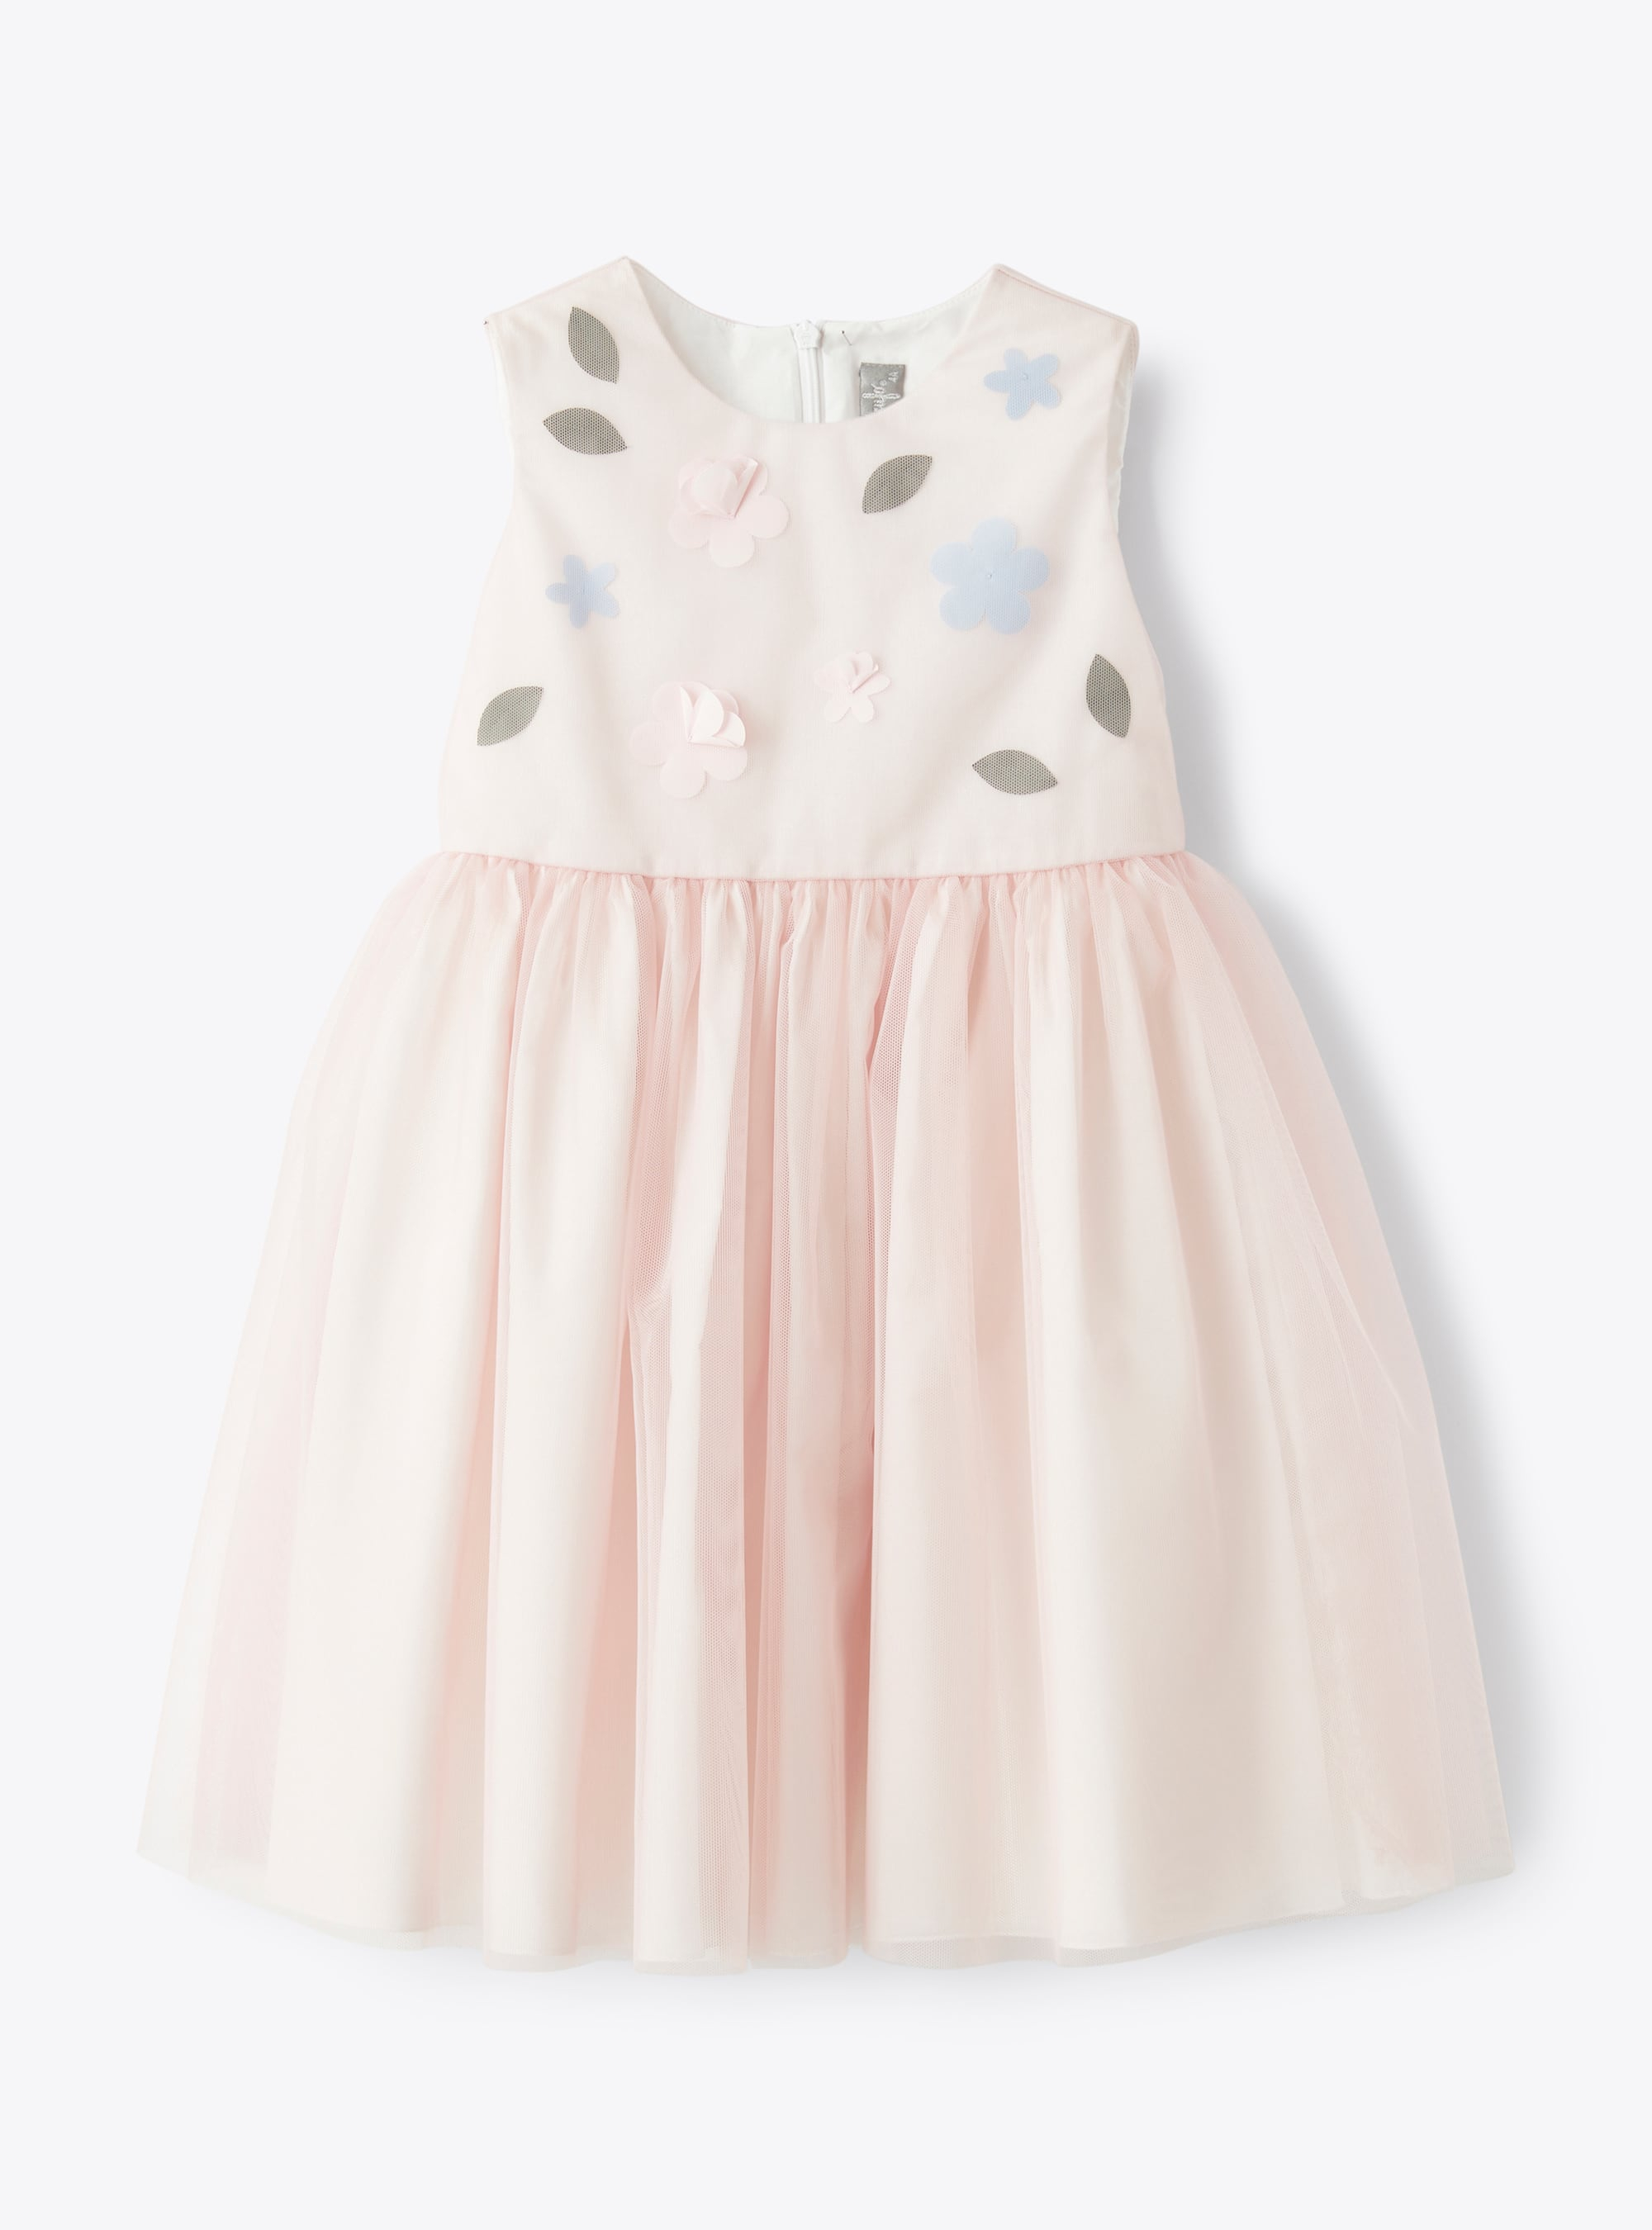 Dress in antique-rose tulle with appliqué flowers - Dresses - Il Gufo